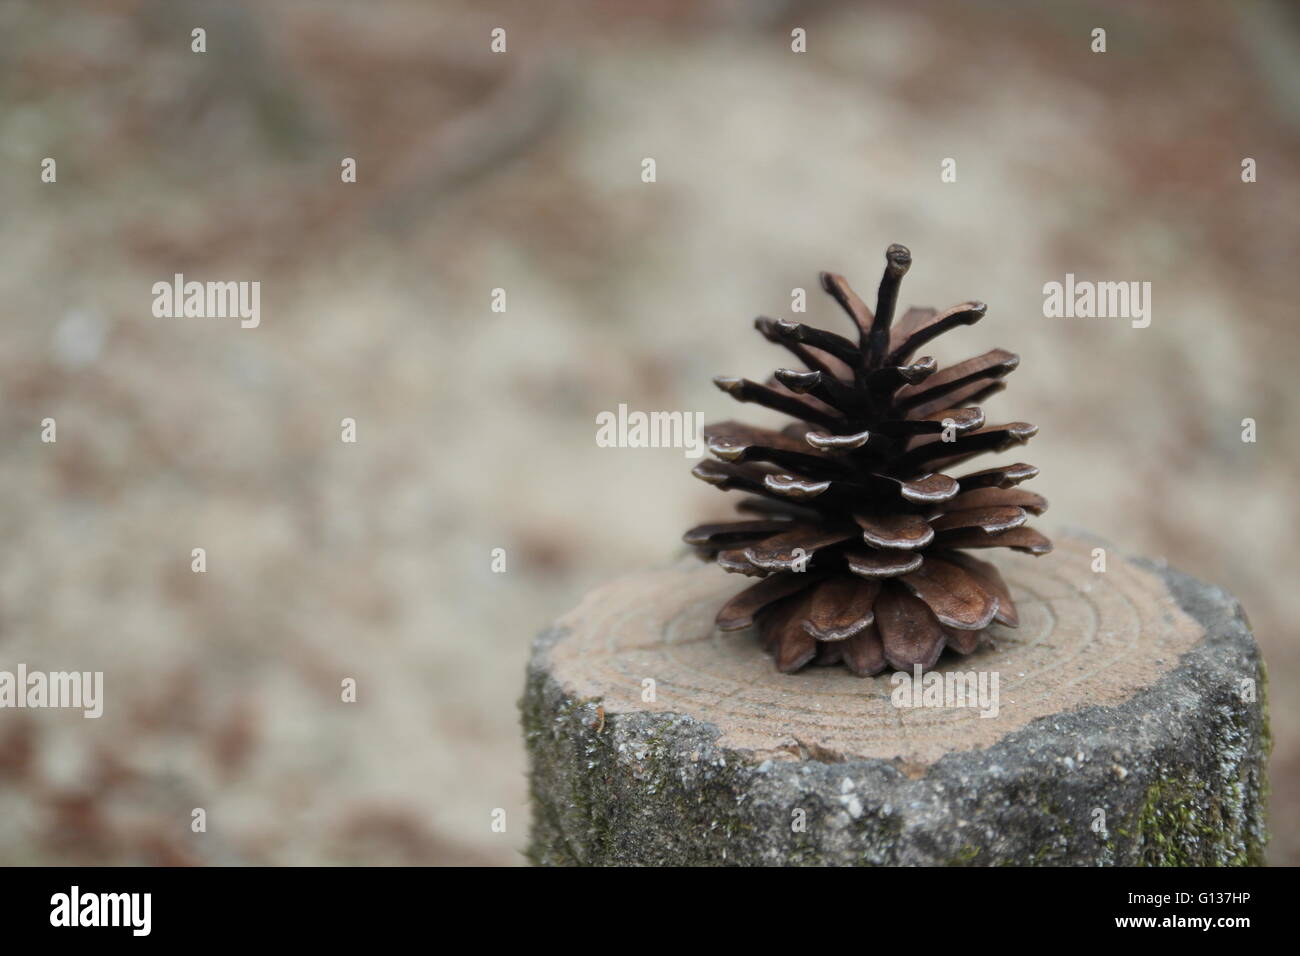 Pine cone on abstract defocus background. Suitable for Christmas card or poster designing. Stock Photo